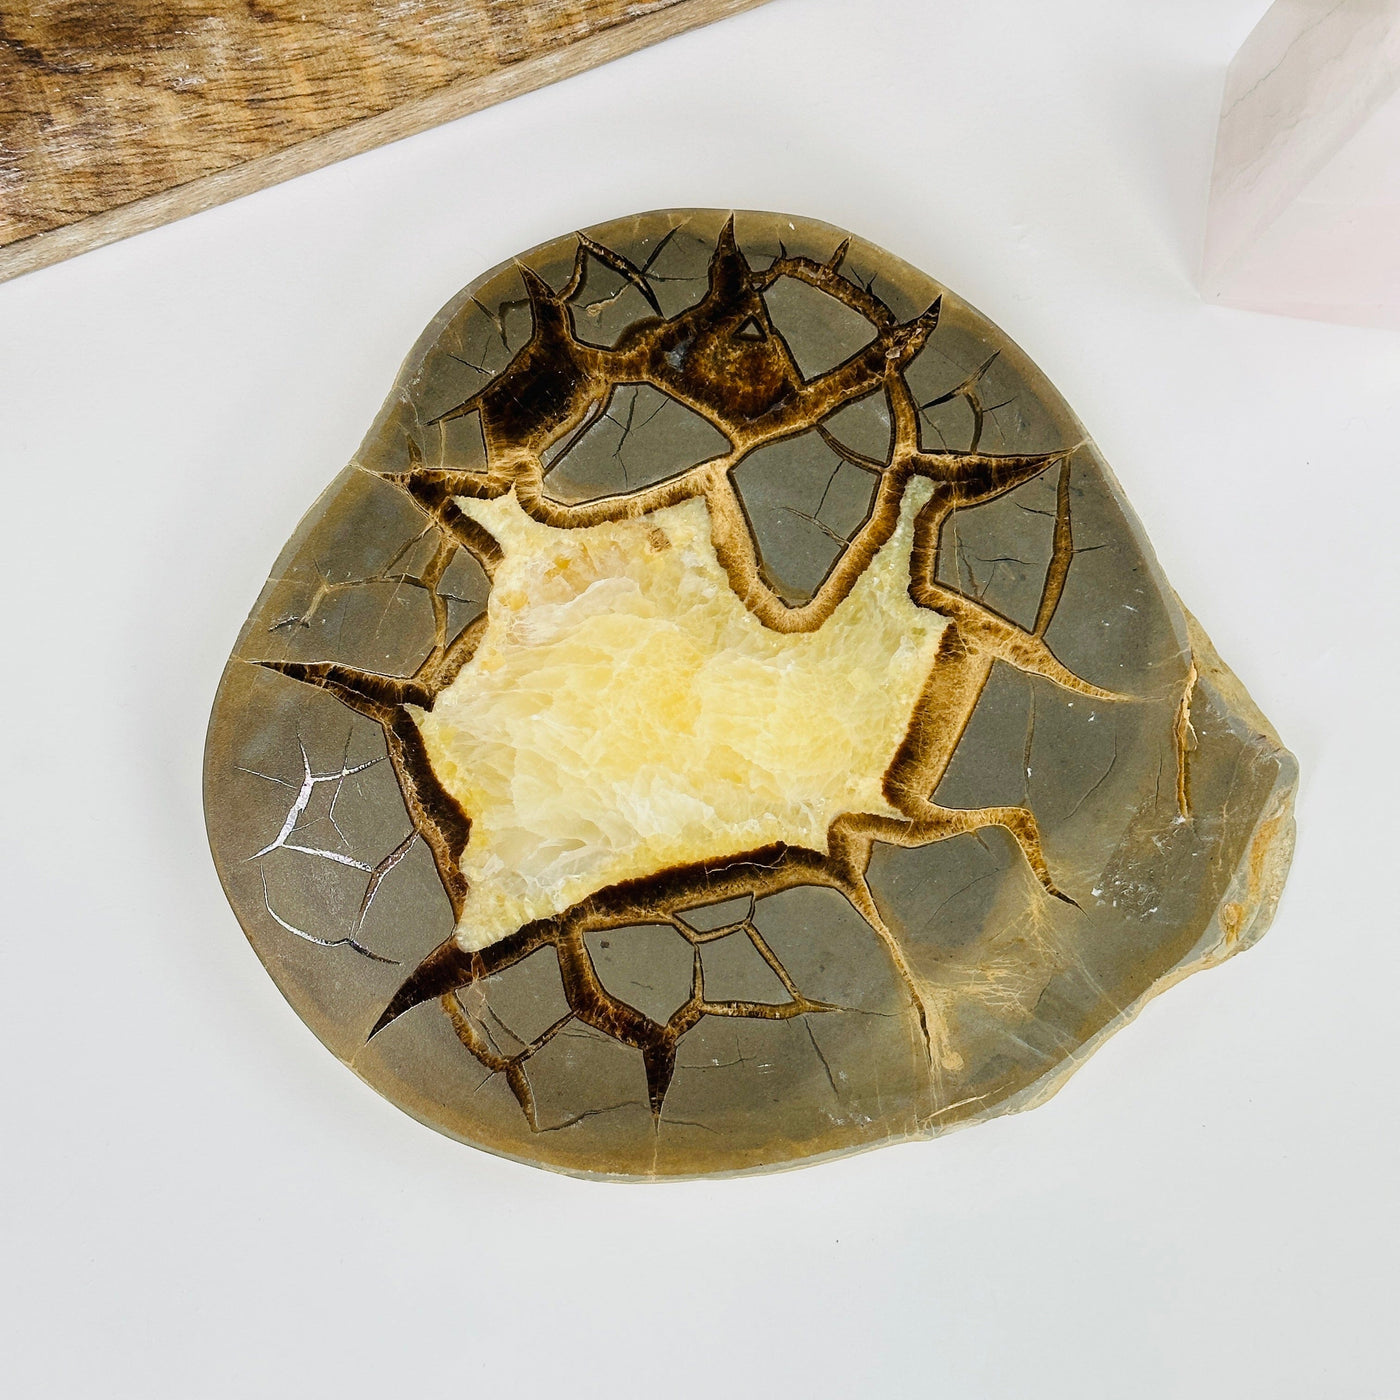 Septarian slab with decorations in the background